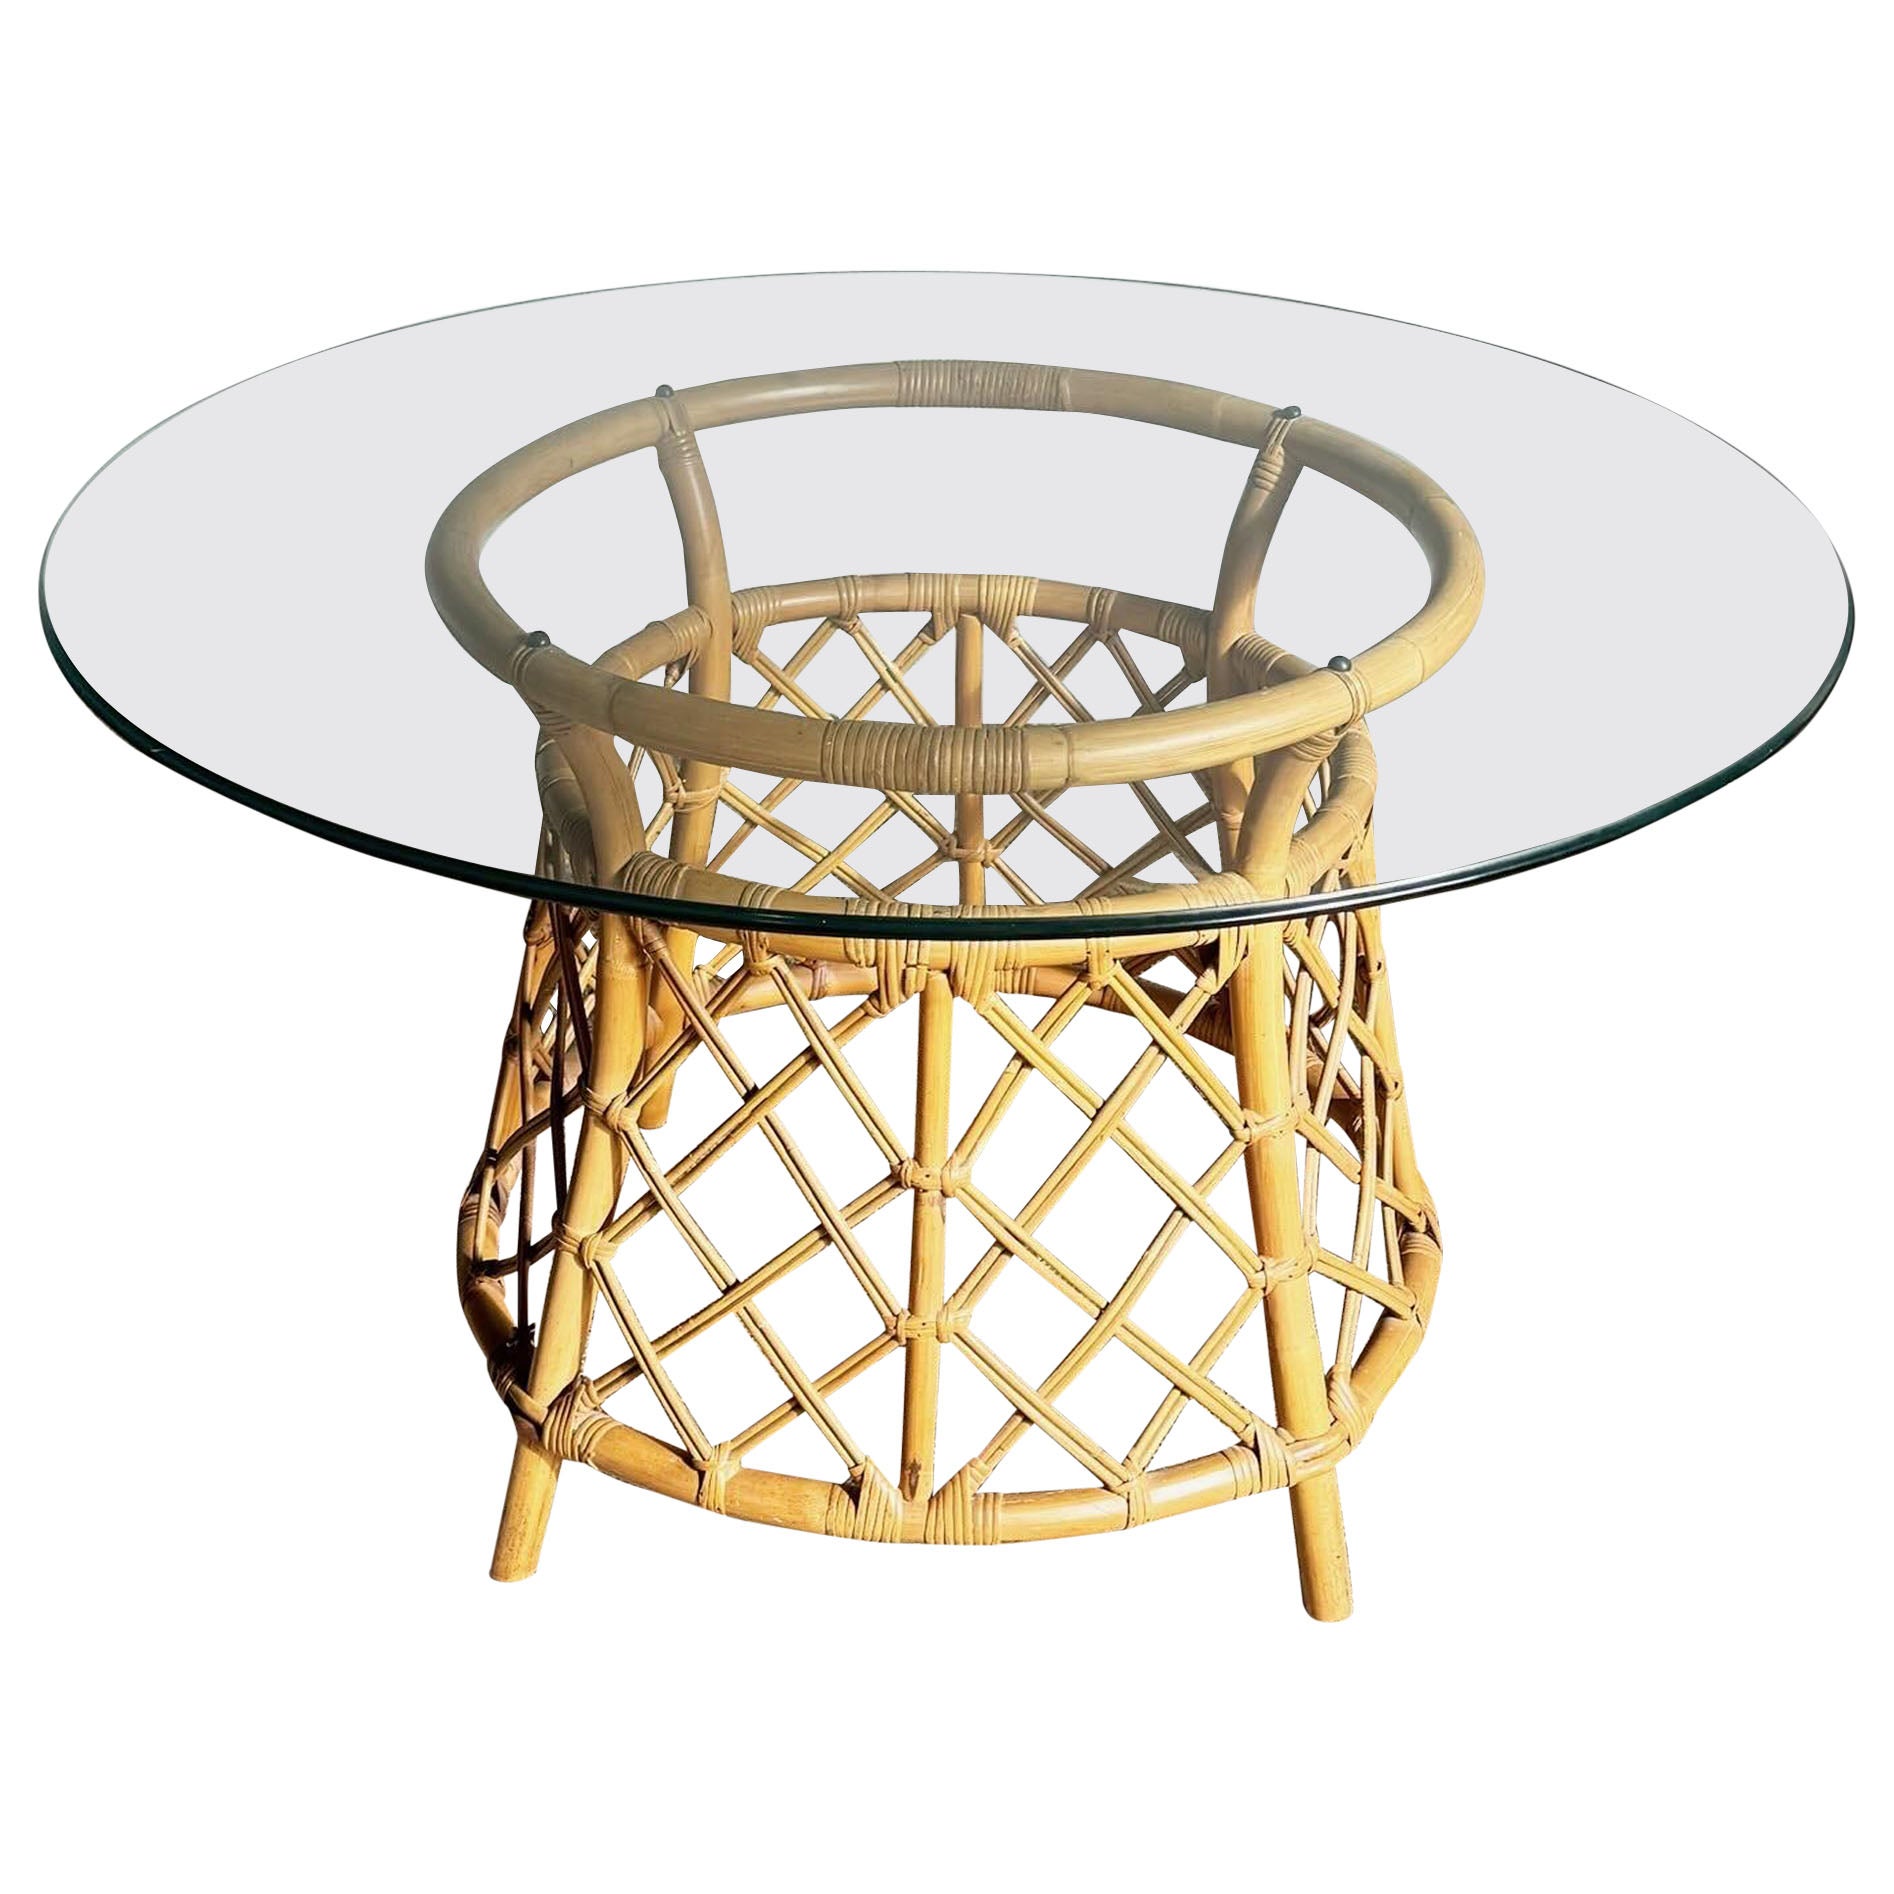 Boho Chic Bamboo Rattan Circular Glass Top Dining Table by Ficks Reed